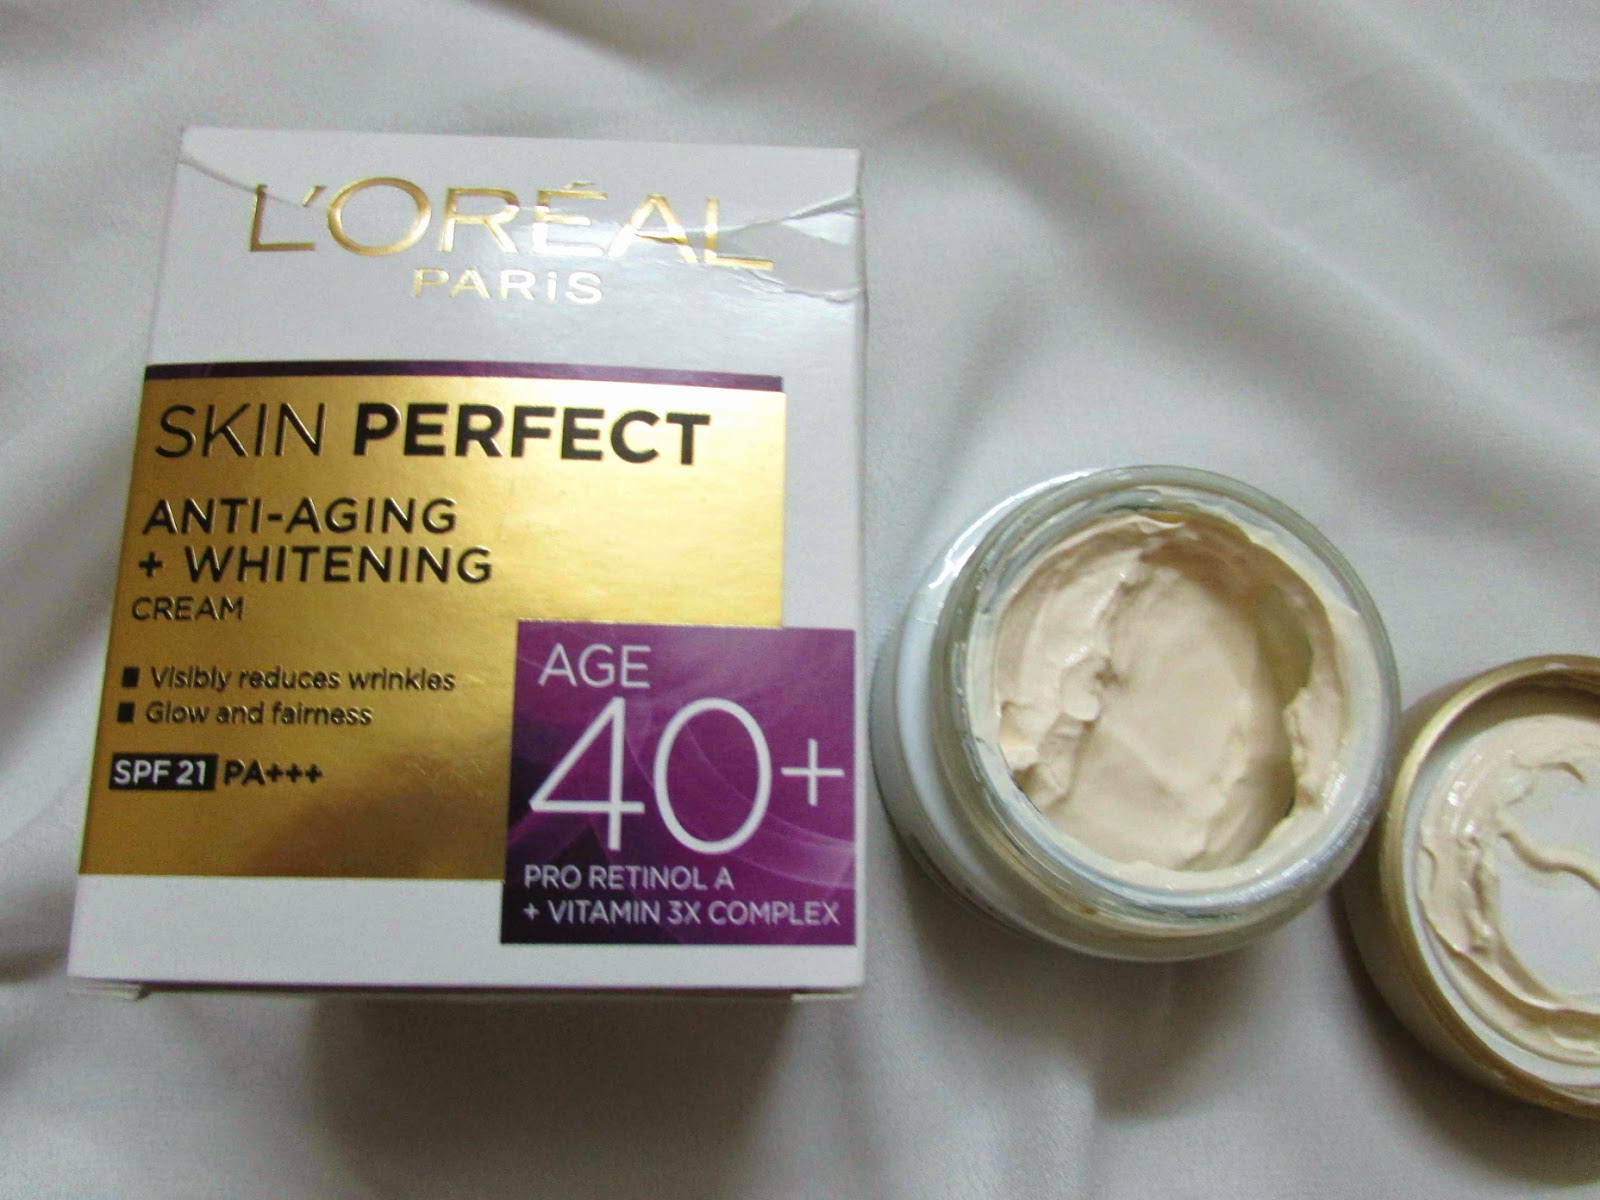 Loreal Skin Perfect Creams,Loreal Paris Skin Perfect Anti Imperfections + Whitening Cream Age 20+, Loreal Paris Skin Perfect Anti Fine Lines + Whitening Cream Age 30+, Loreal Paris Skin Perfect Anti Aging + Whitening Cream Age 40+, Loreal Skin Perfect Cream price review, anti aging cream, cream, anti aging treatment, best anti aging cream, sunscreen cream, beauty , fashion,beauty and fashion,beauty blog, fashion blog , indian beauty blog,indian fashion blog, beauty and fashion blog, indian beauty and fashion blog, indian bloggers, indian beauty bloggers, indian fashion bloggers,indian bloggers online, top 10 indian bloggers, top indian bloggers,top 10 fashion bloggers, indian bloggers on blogspot,home remedies, how to